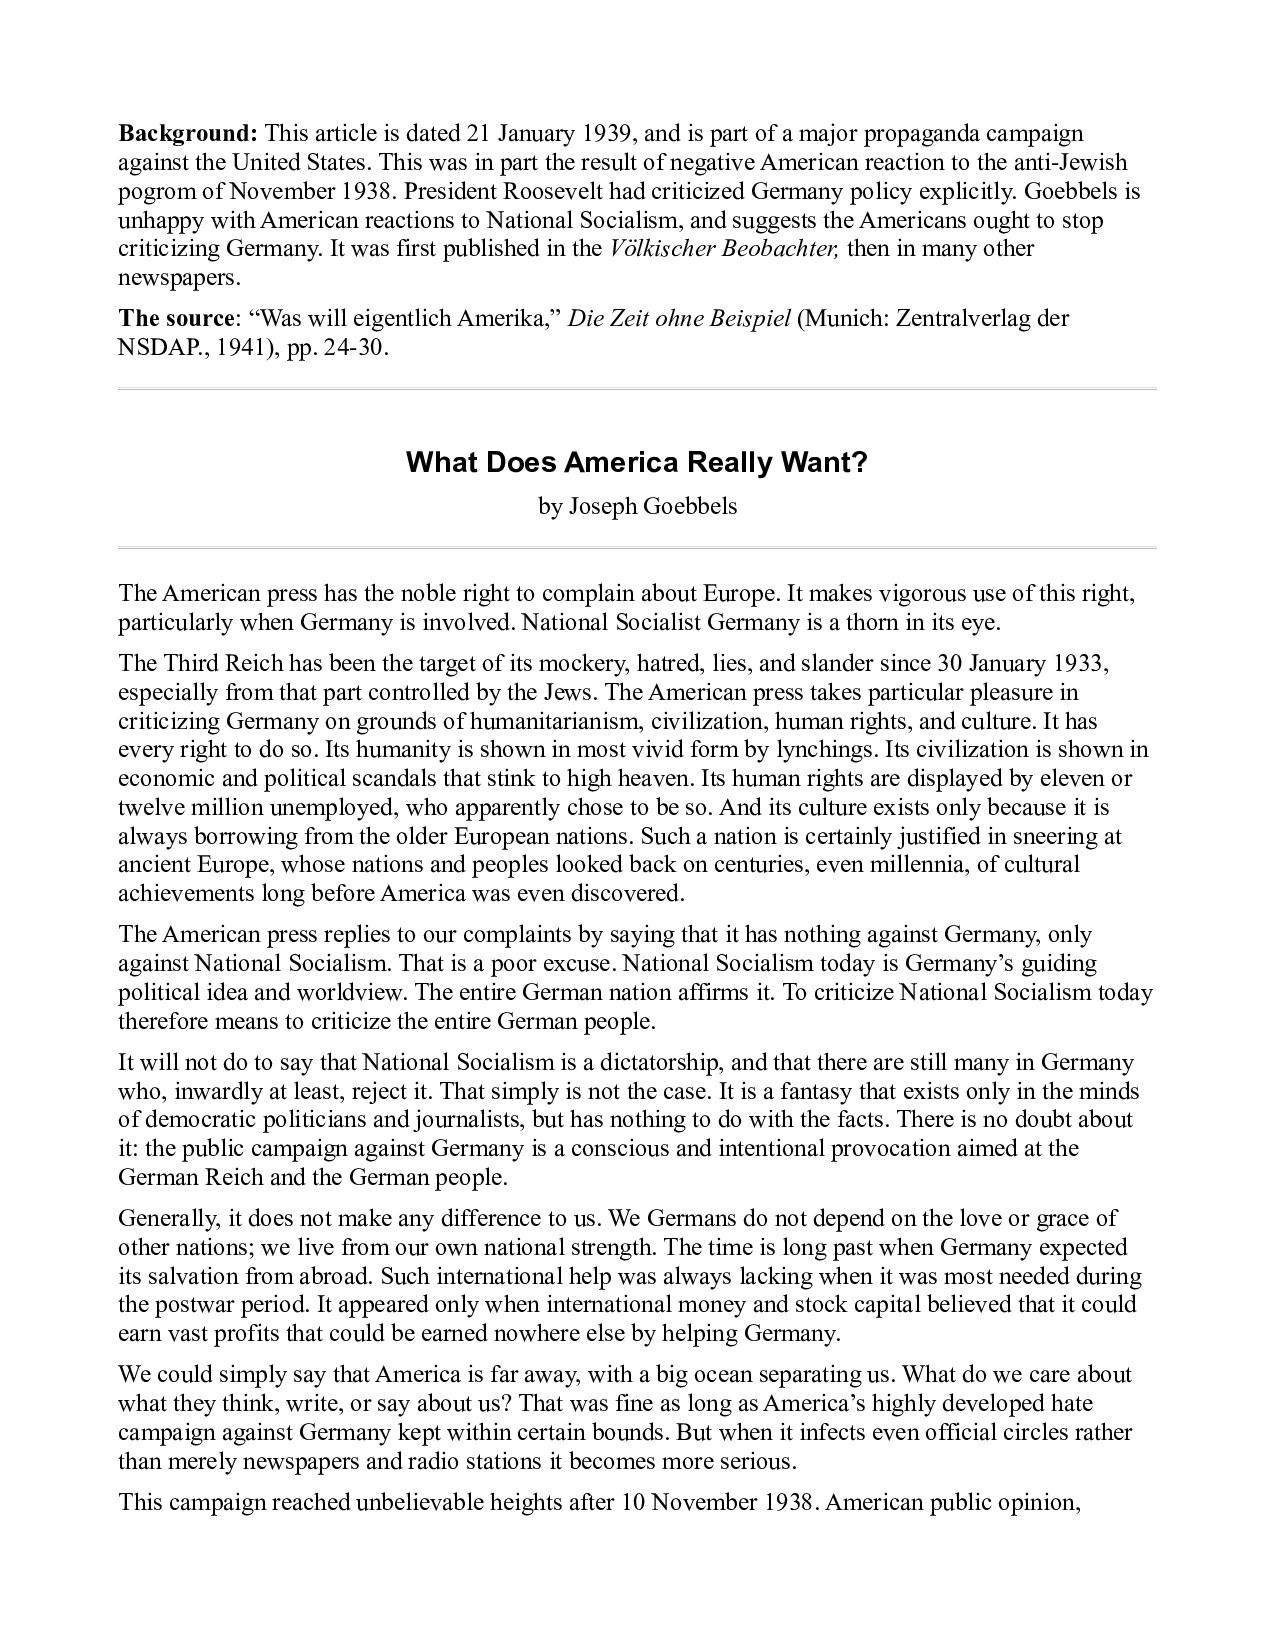 What Does America Really Want - Goebbels